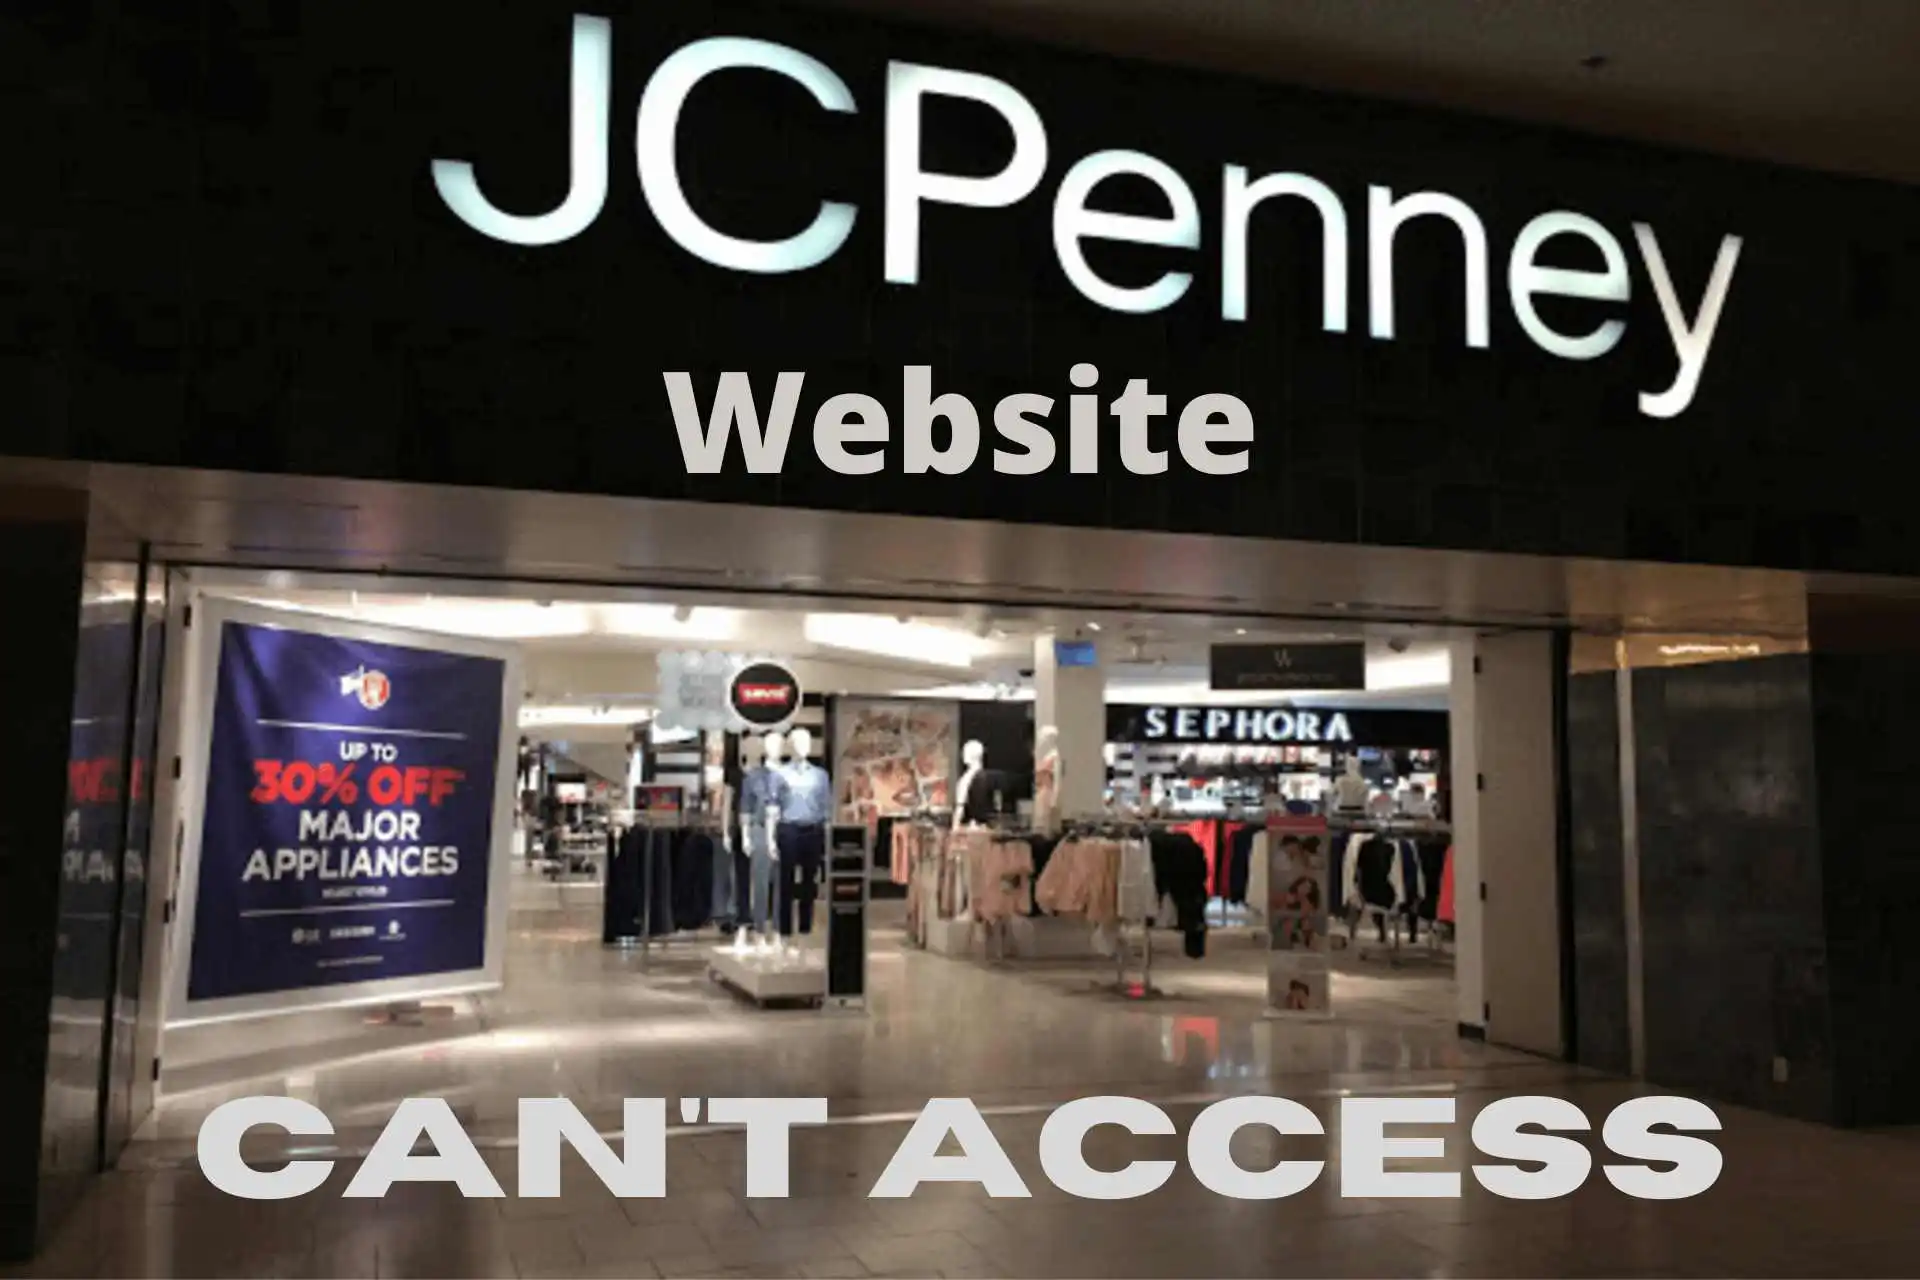 Can't access JCPenney website